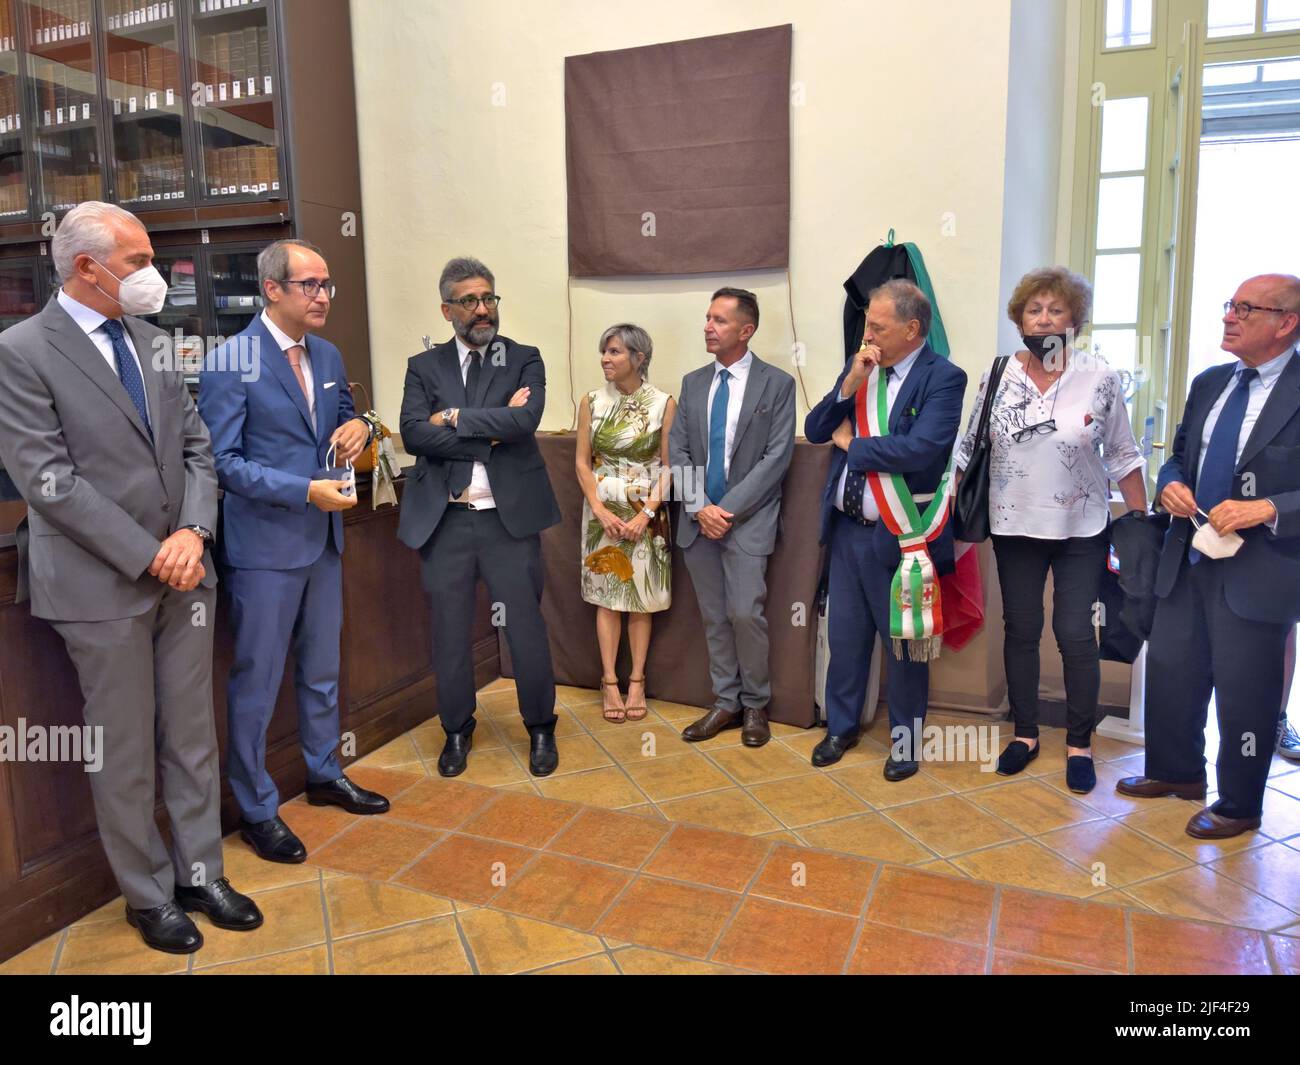 The unveiling ceremony of the plaque in memory of the Jewish lawyers excluded from the Italian racial laws of 1938-1939 Stock Photo